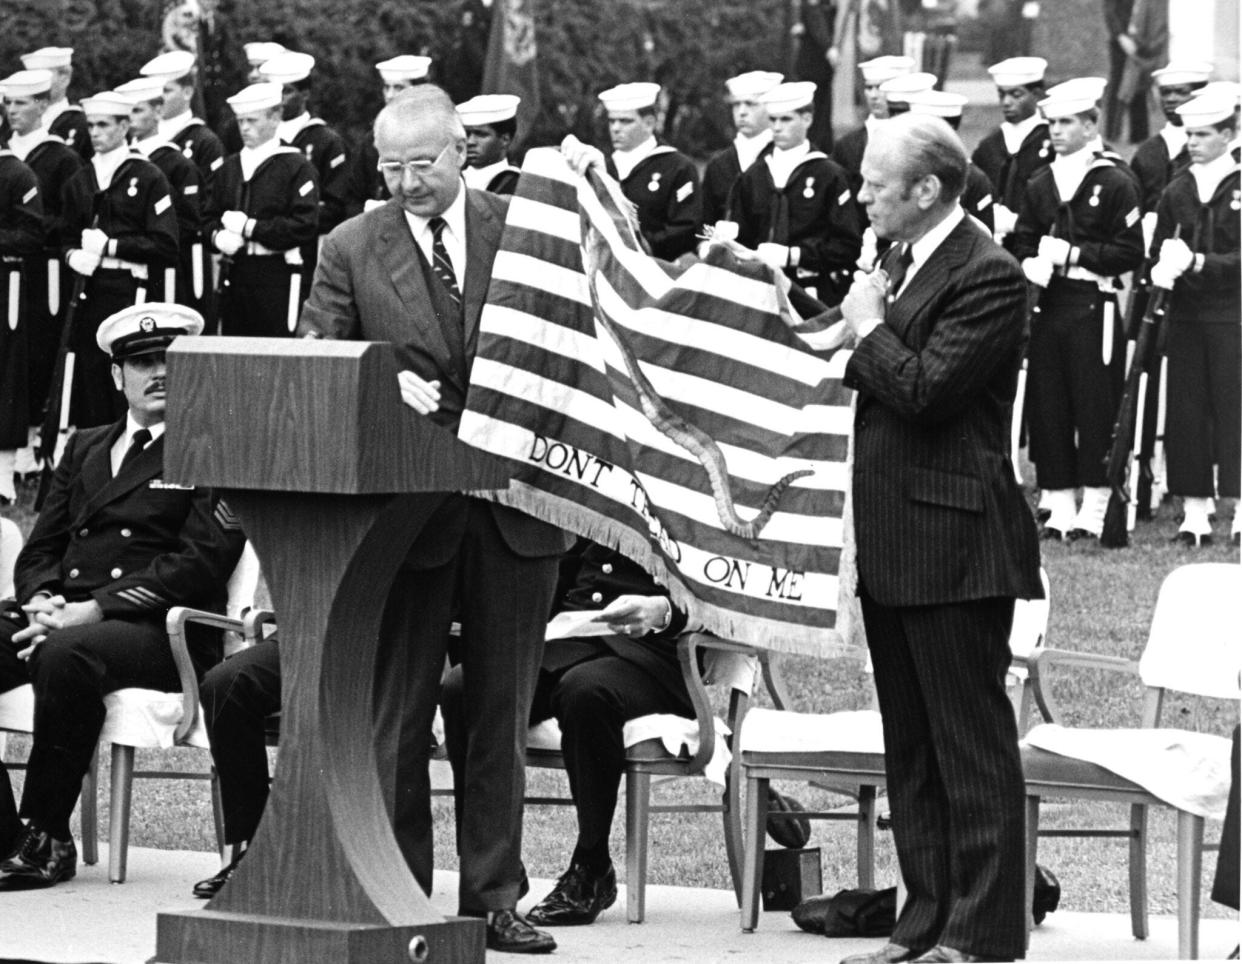 President Gerald R. Ford, right, receives the prototype of the ceremonial Continental Navy Jack from Navy Secretary J. William Middendorf during an October 1975 ceremony in Washington. A smaller version of the flag was flown from the jack staff of every U.S. Navy ship in December 1976 as part of the Navy's bicentennial celebration.